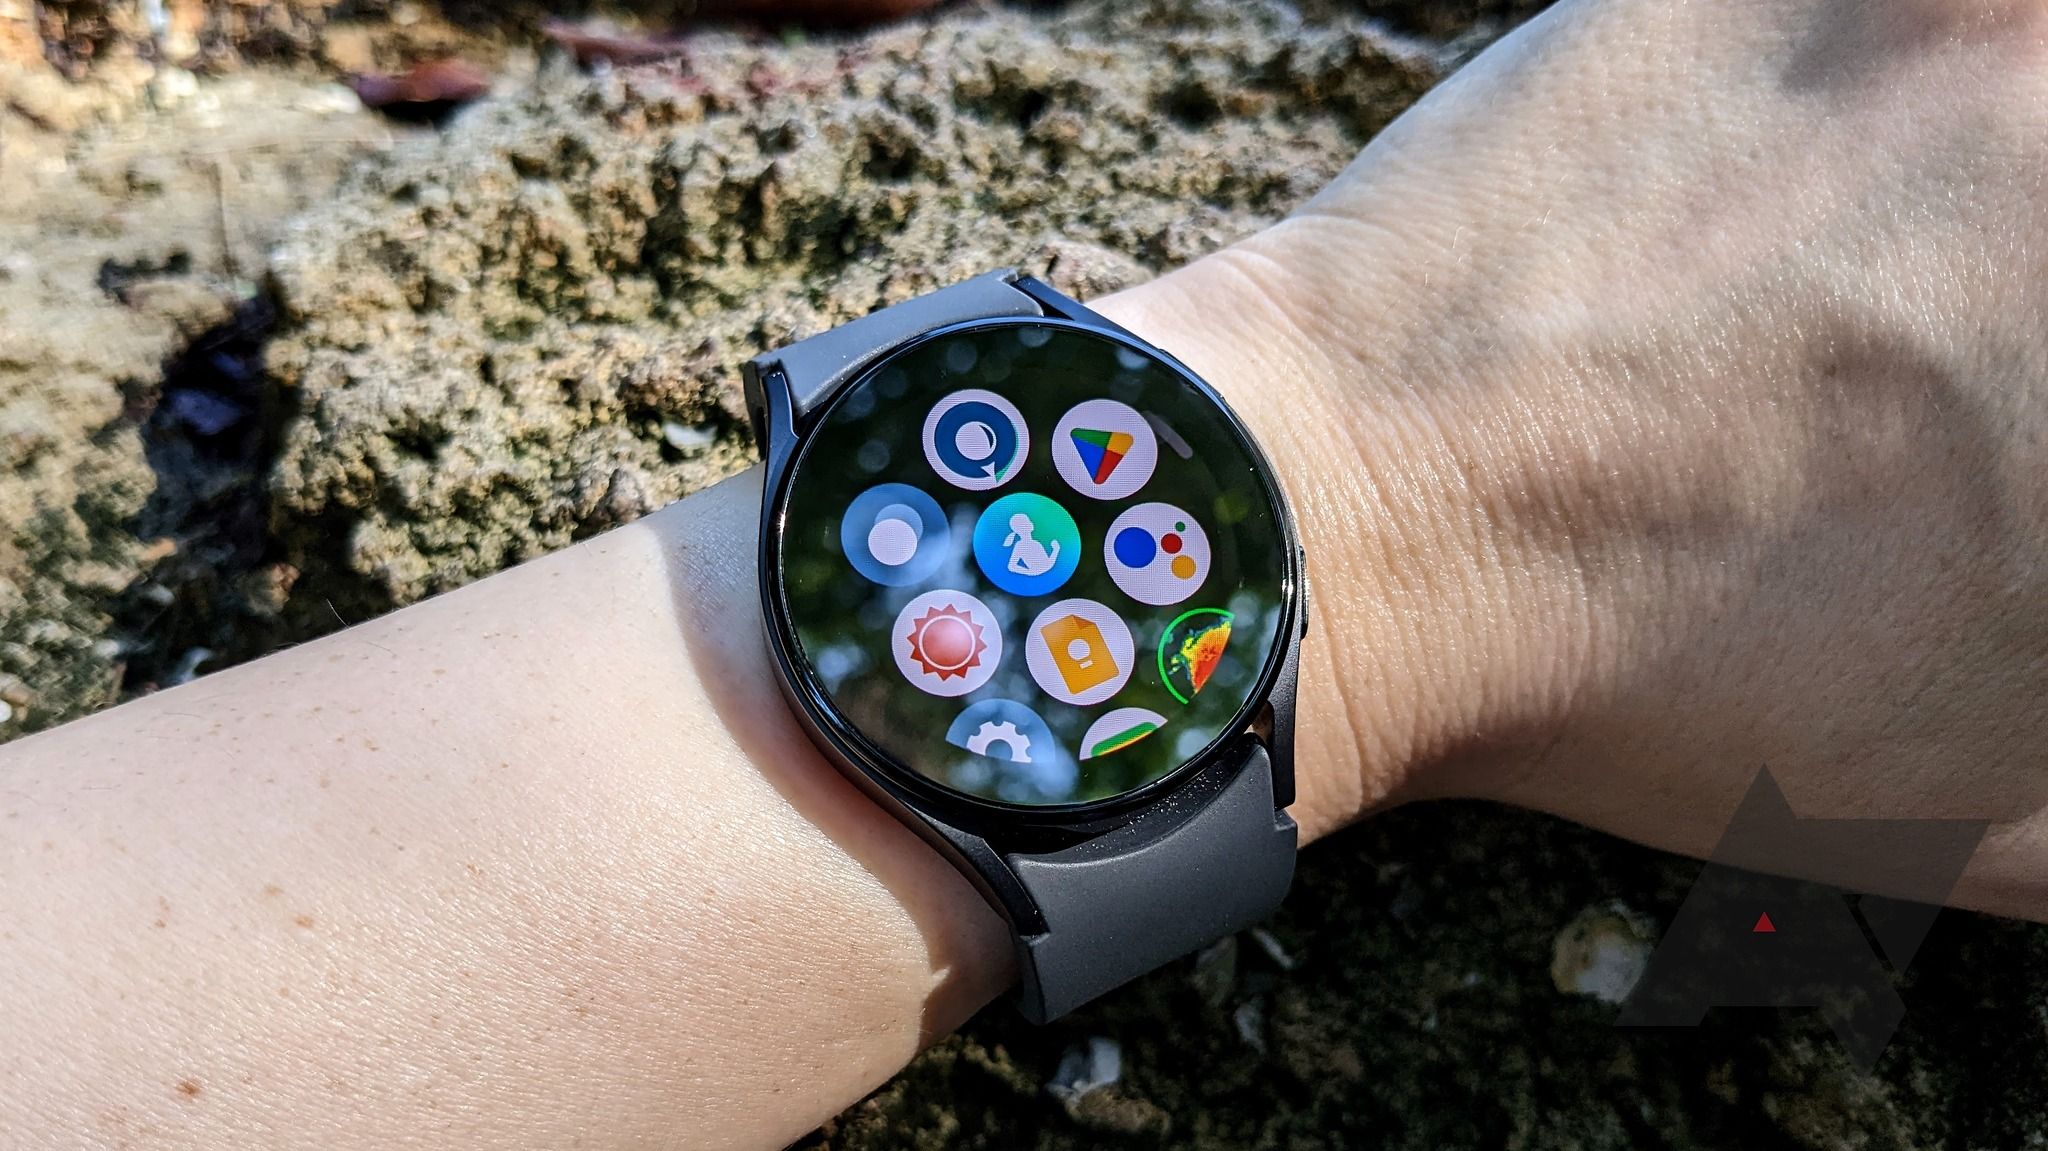 Galaxy Watch 5 being worn on a wrist in front of a rocky background with the app drawer screen on